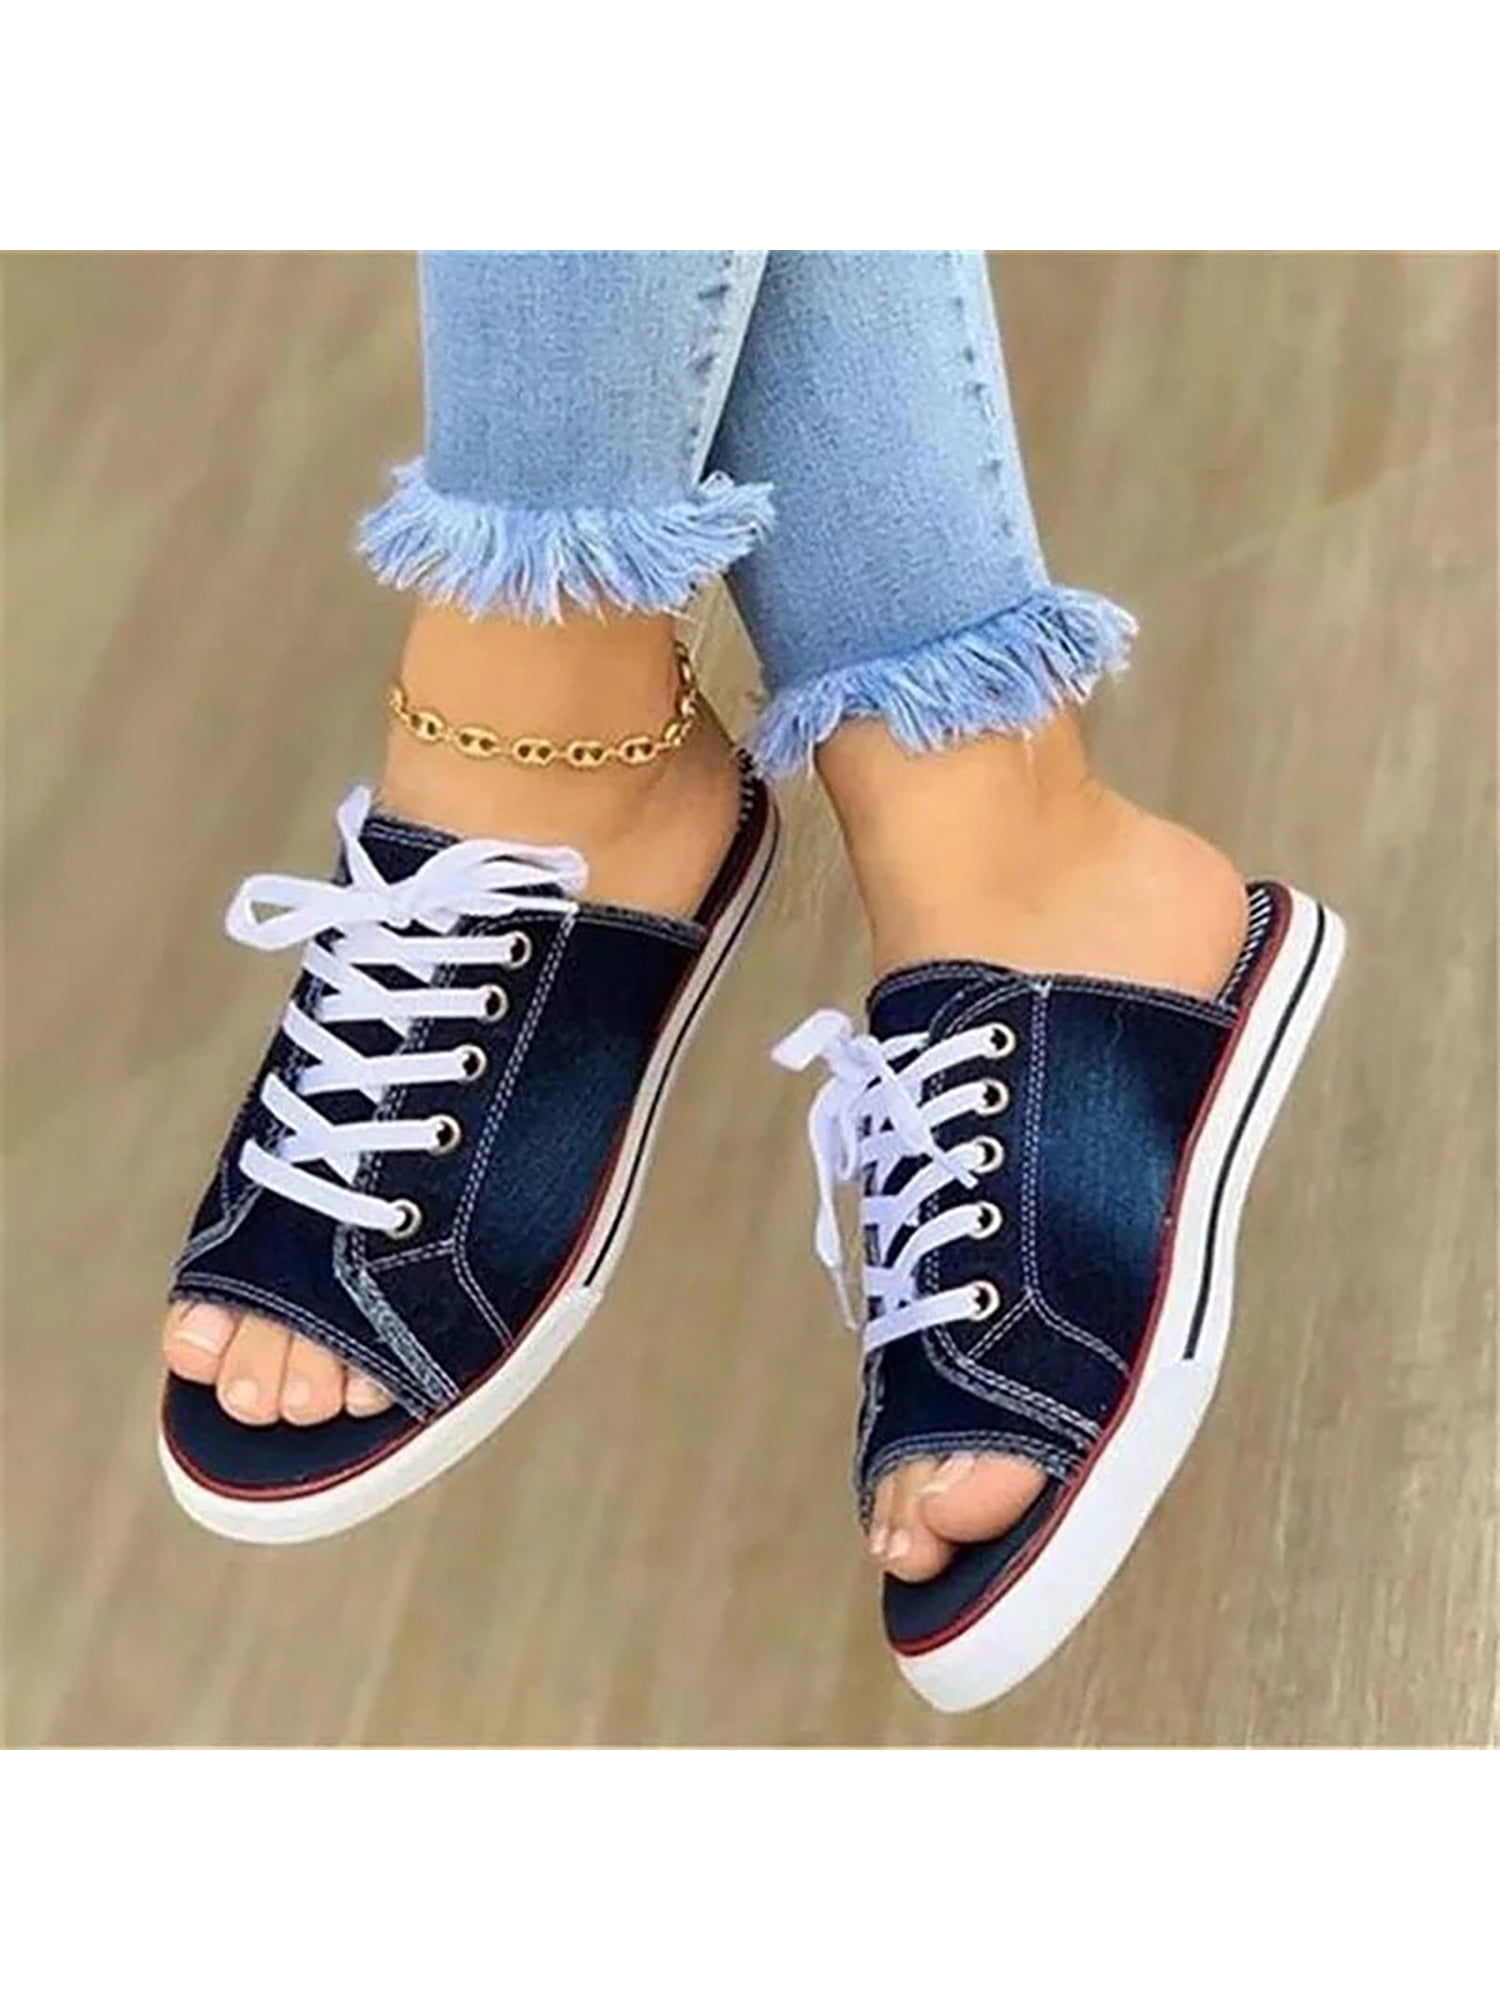 New Womens Open Toe Lace Up Hollow Denim High Top Sandals Flats Breathable Shoes 